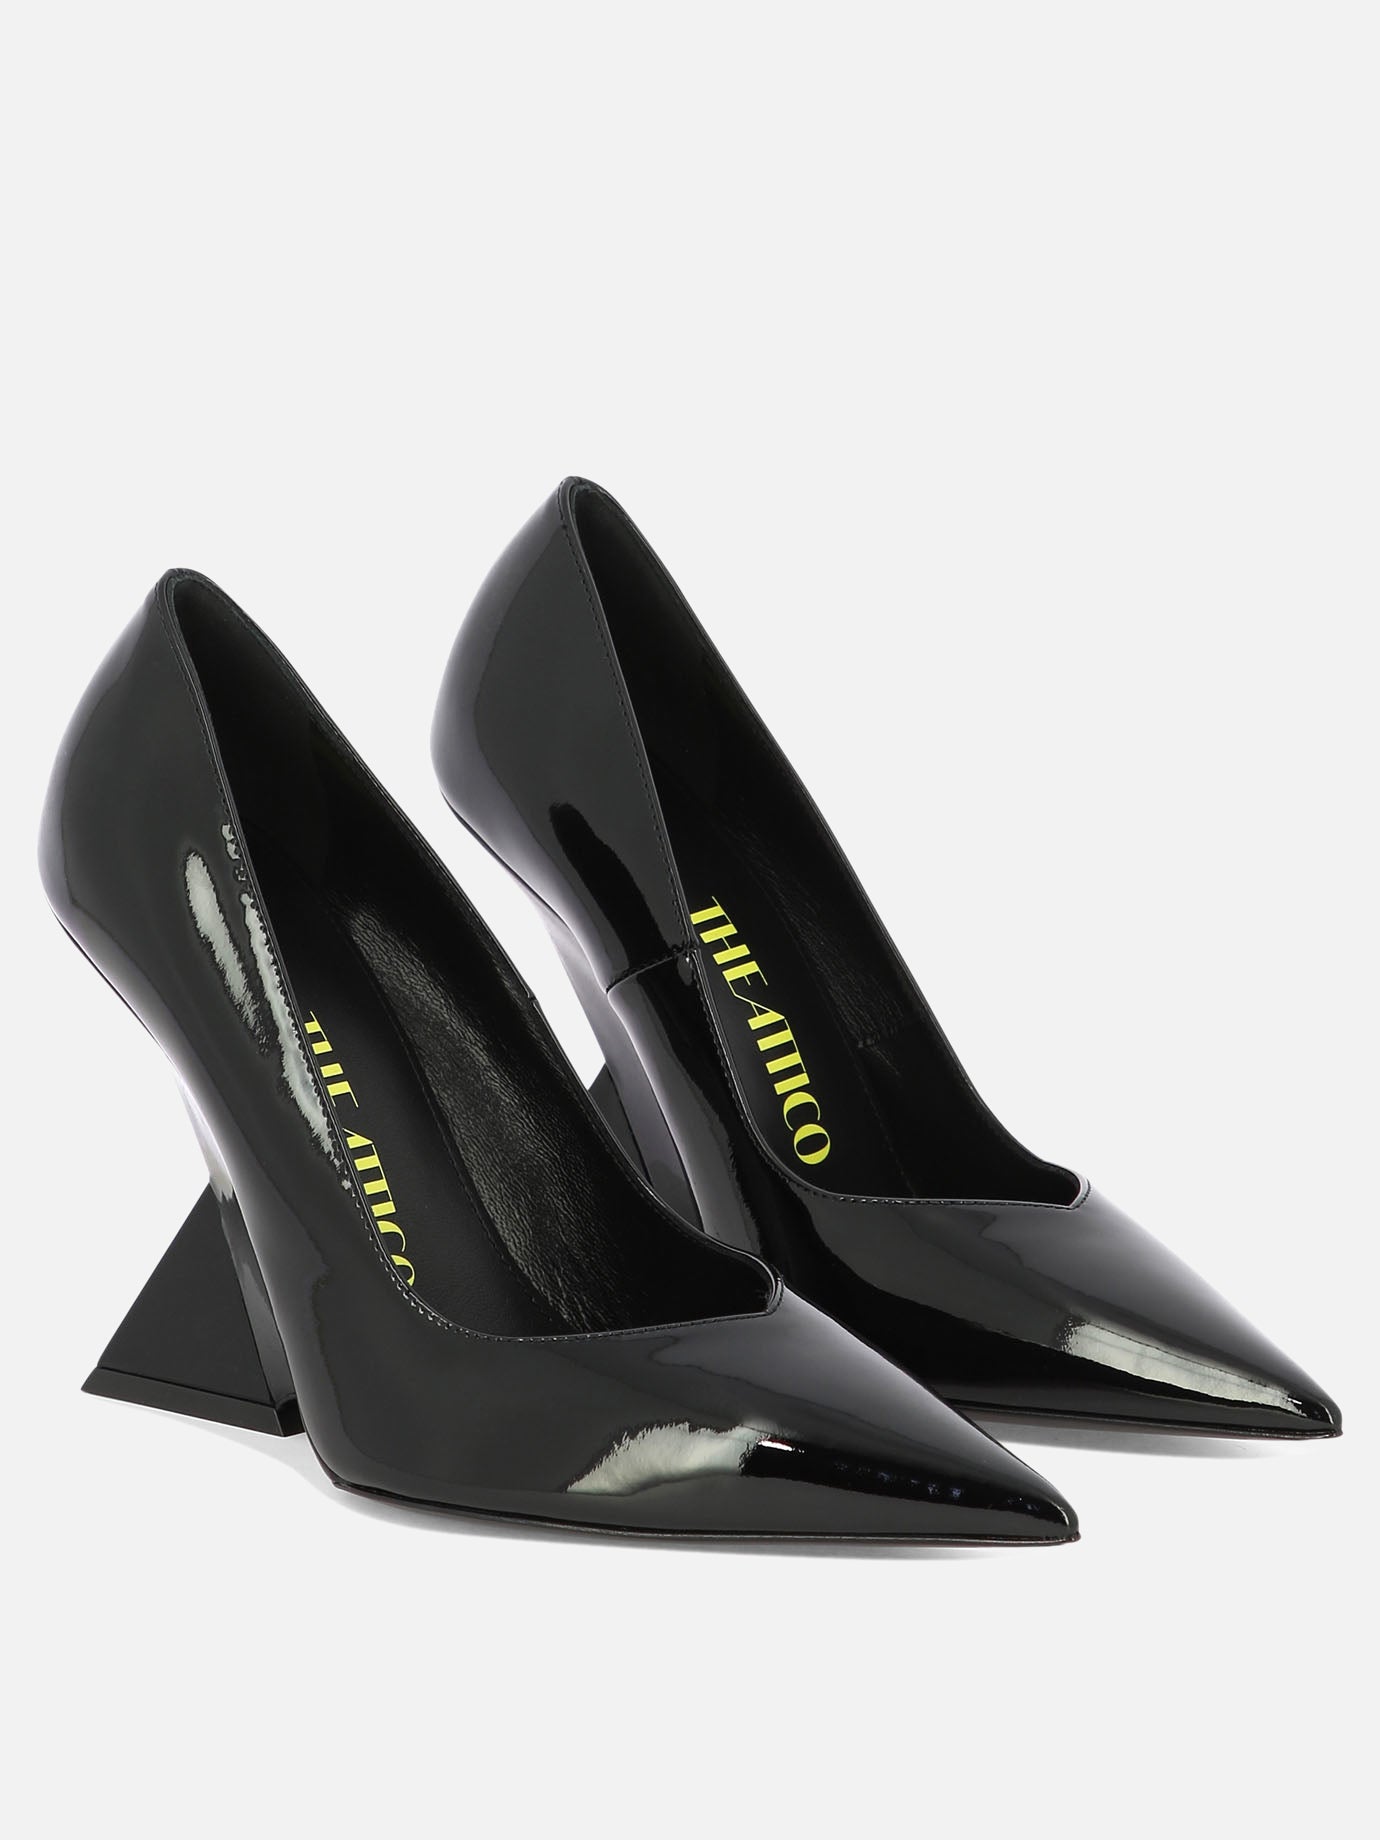 "Cheope" pumps